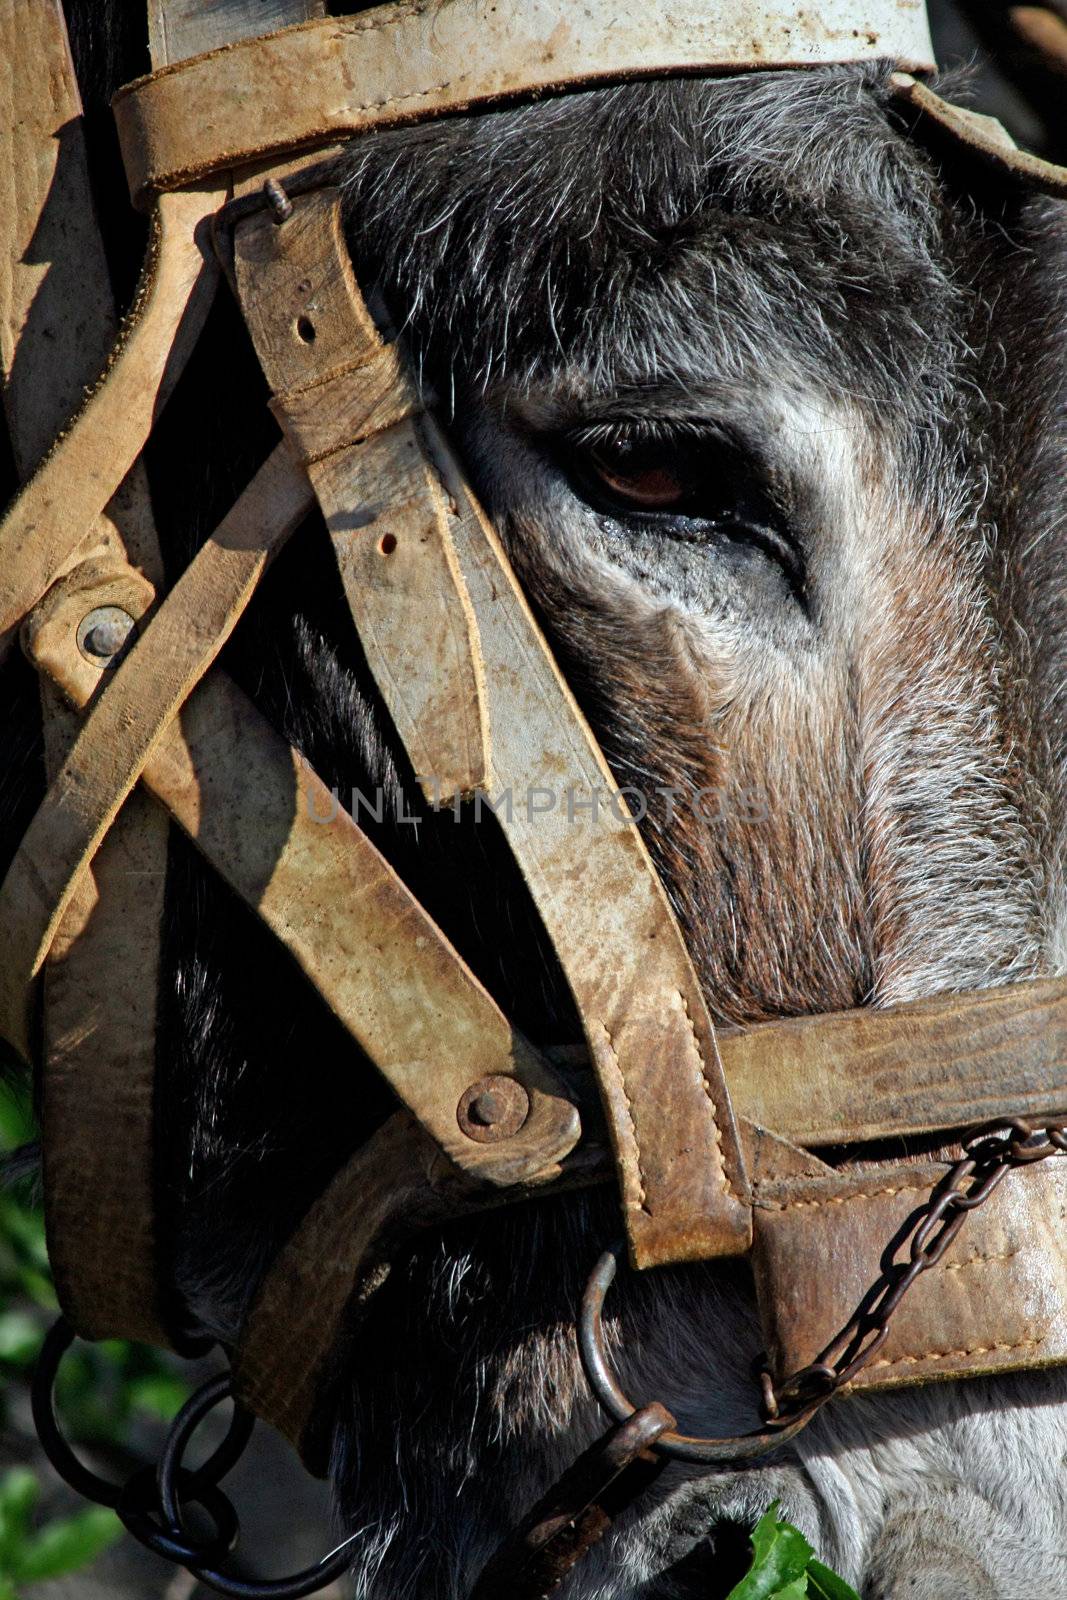 Closeup view of a donkey's head with 